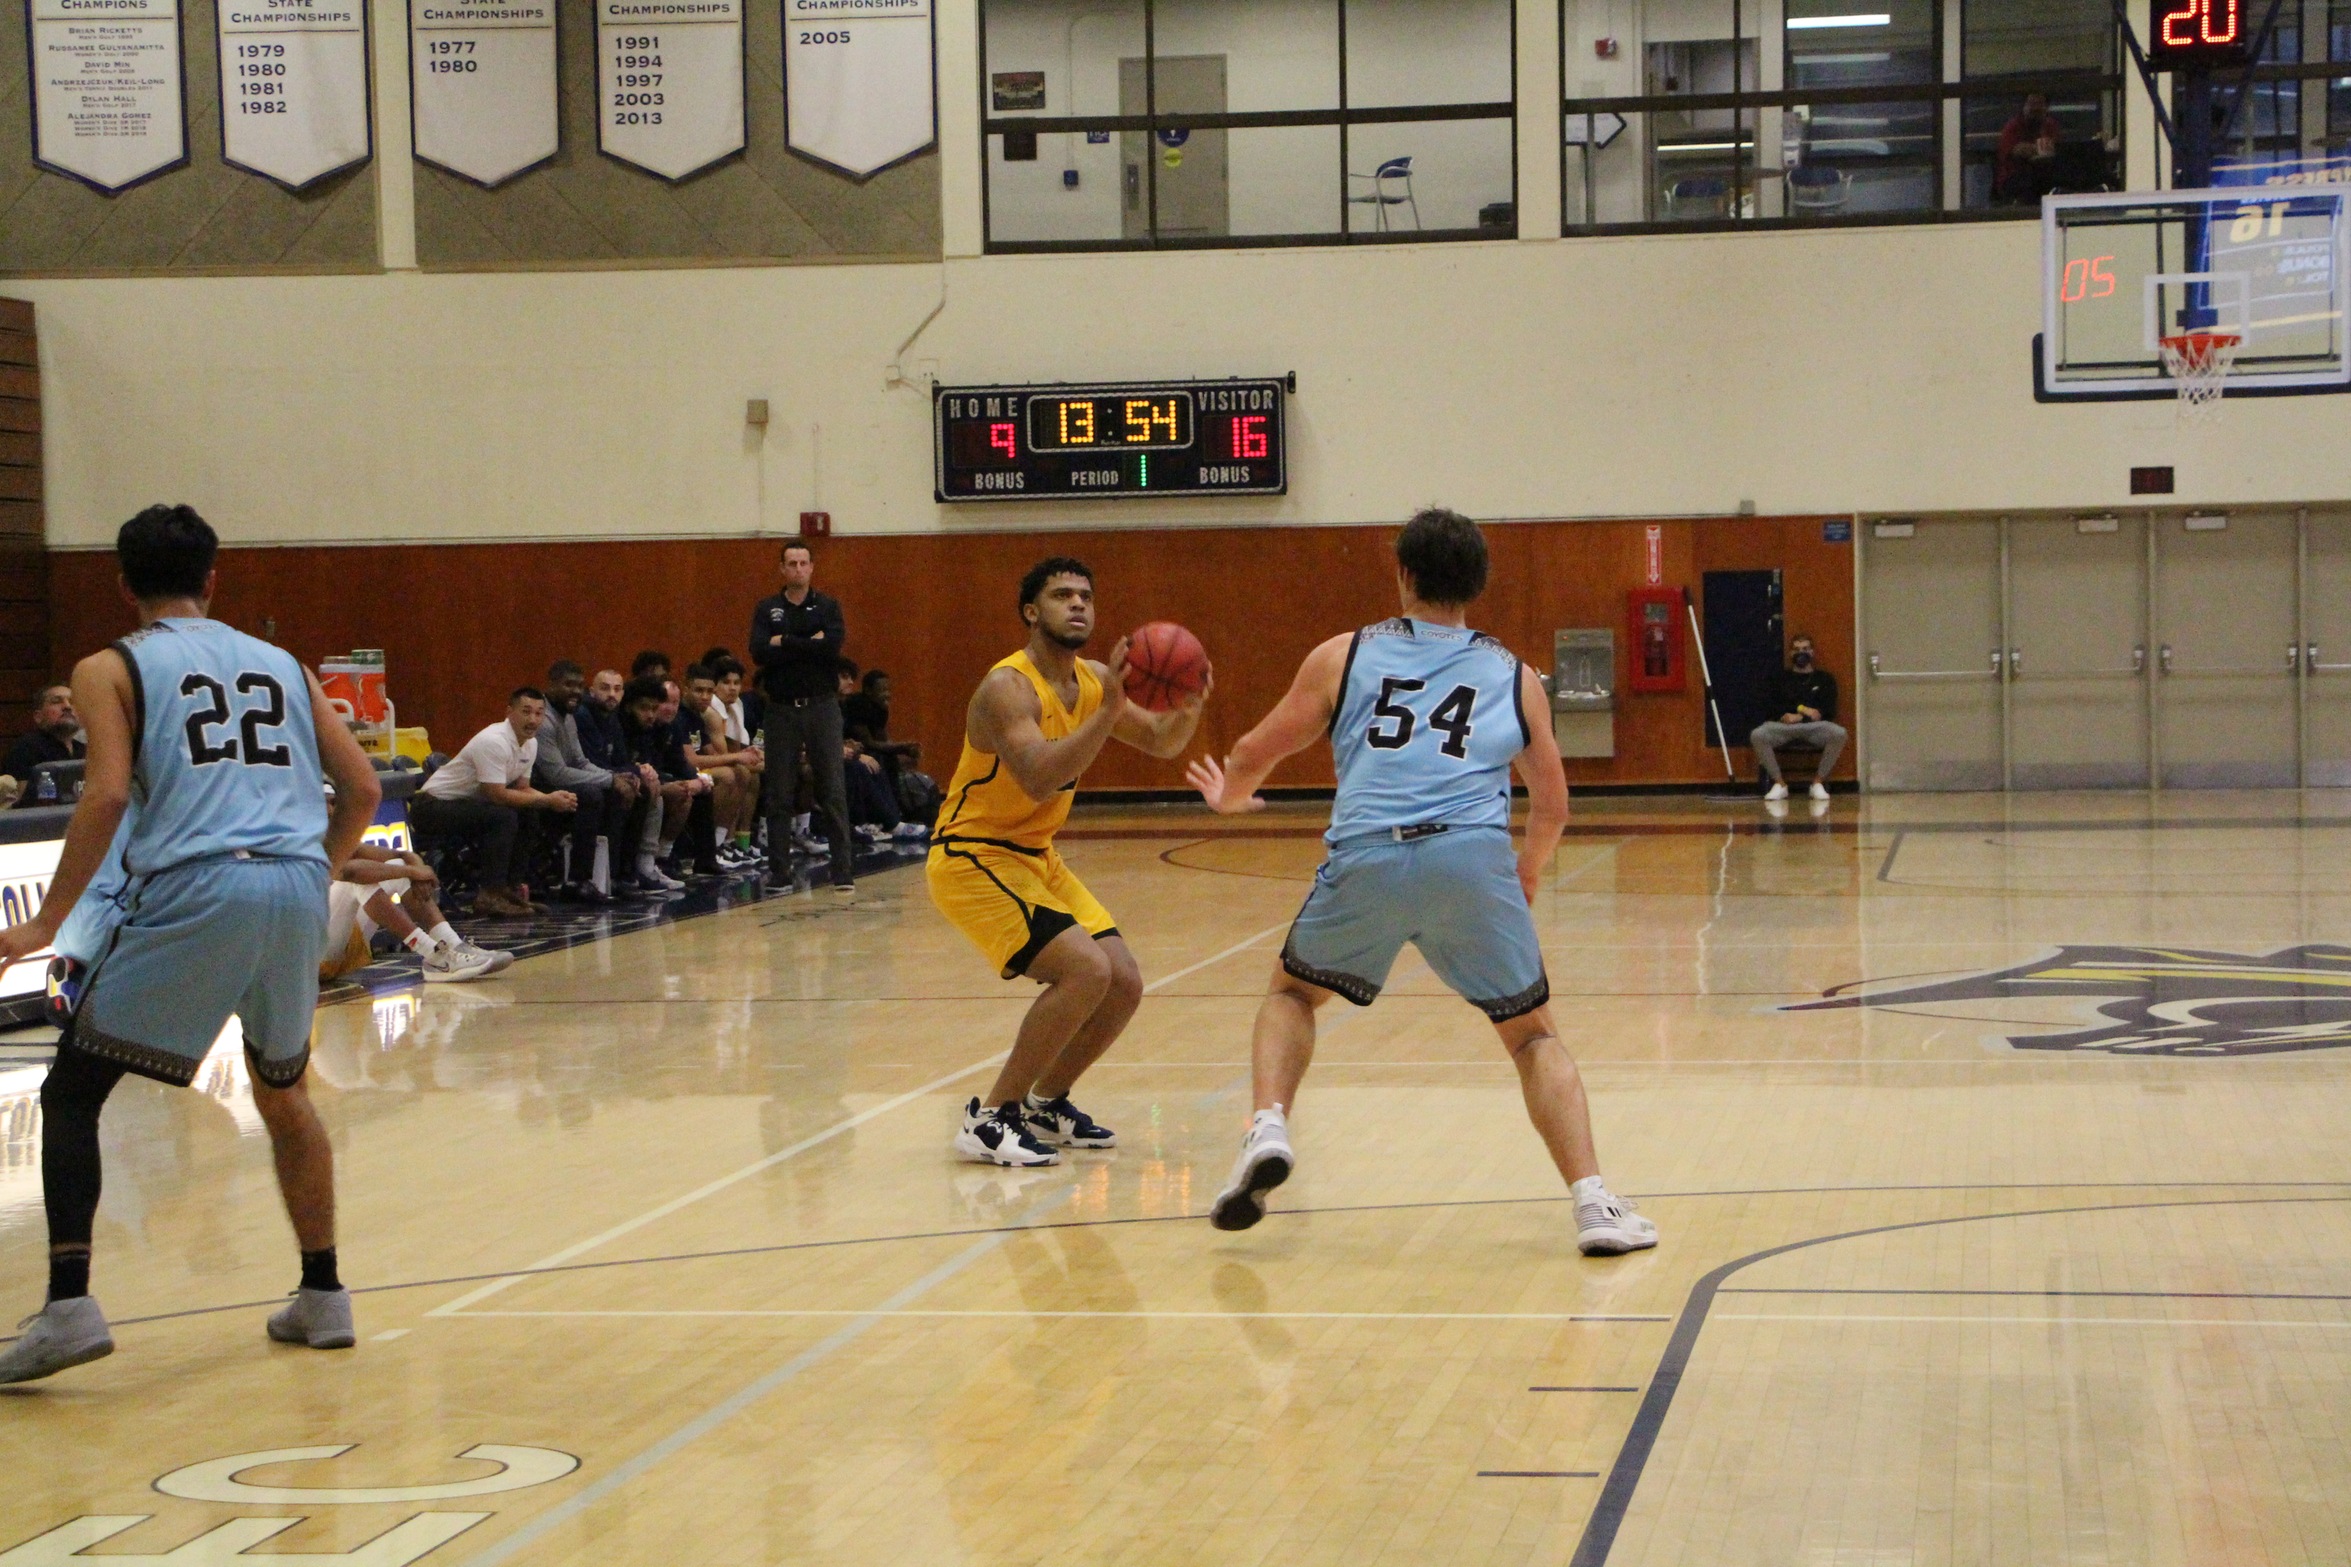 Chargers Take Down #23 Canyons, 86-73